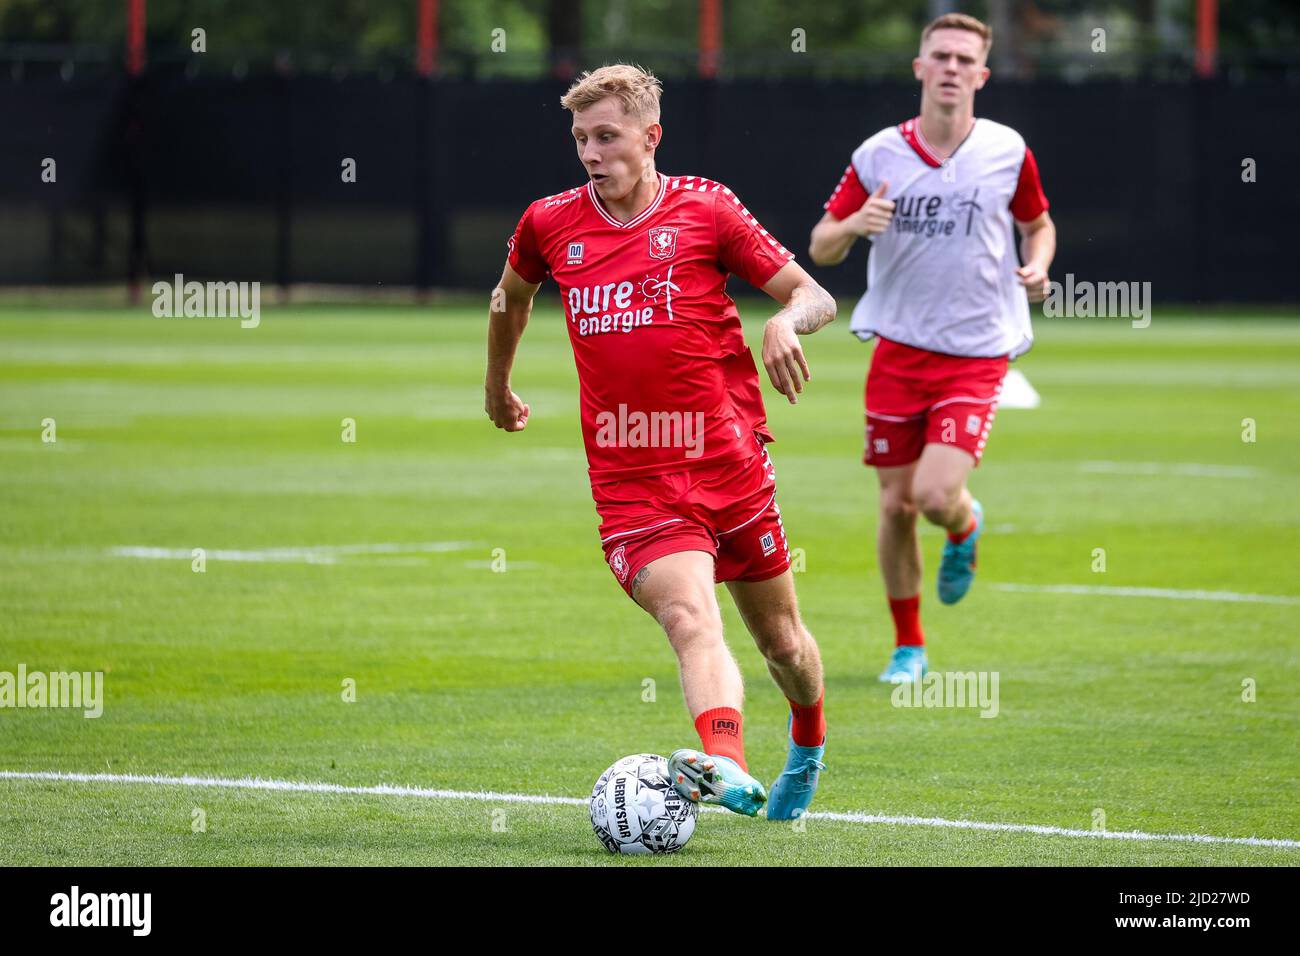 HENGELO, NETHERLANDS - JUNE 17: Jesse Bosch of FC Twente during the First Training Session of the 2022-2023 season of FC Twente at the FC Twente Trainingscentrum on June 17, 2022 in Hengelo, Netherlands (Photo by Marcel ter Bals/Orange Pictures) Stock Photo